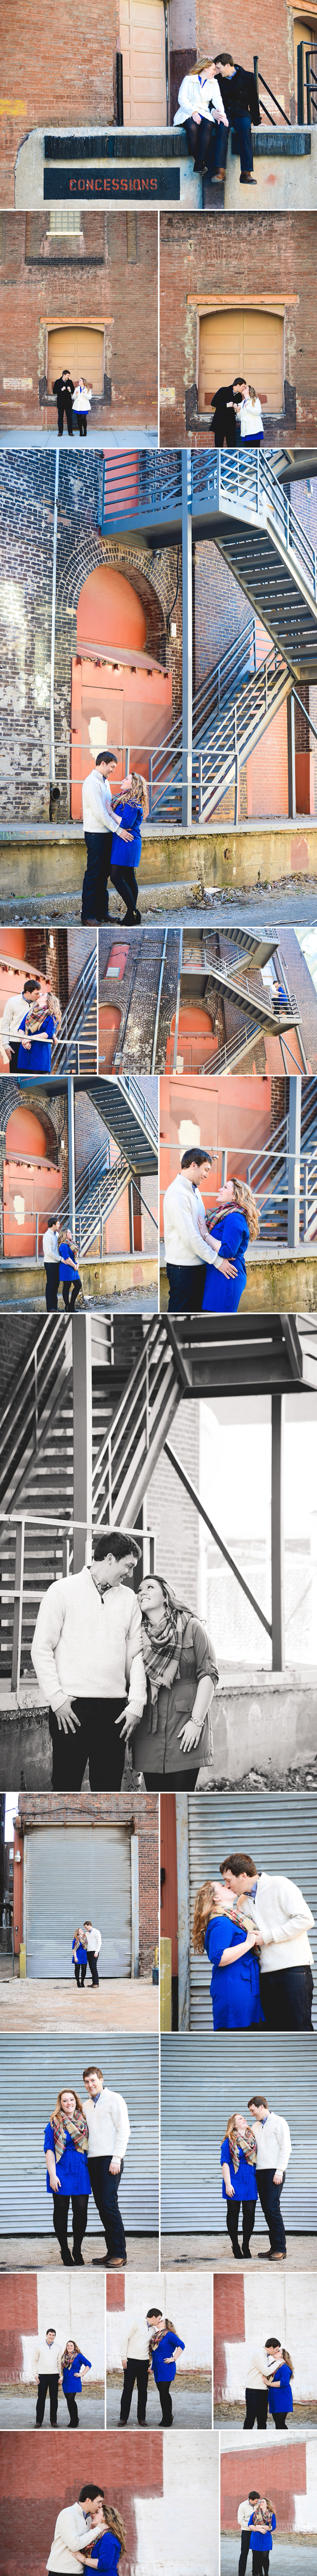 A-colorful-urban-downtown-kansas-city-engagement-shoot-in-the-west-bottoms-lacey-rene-studios-2.jpg